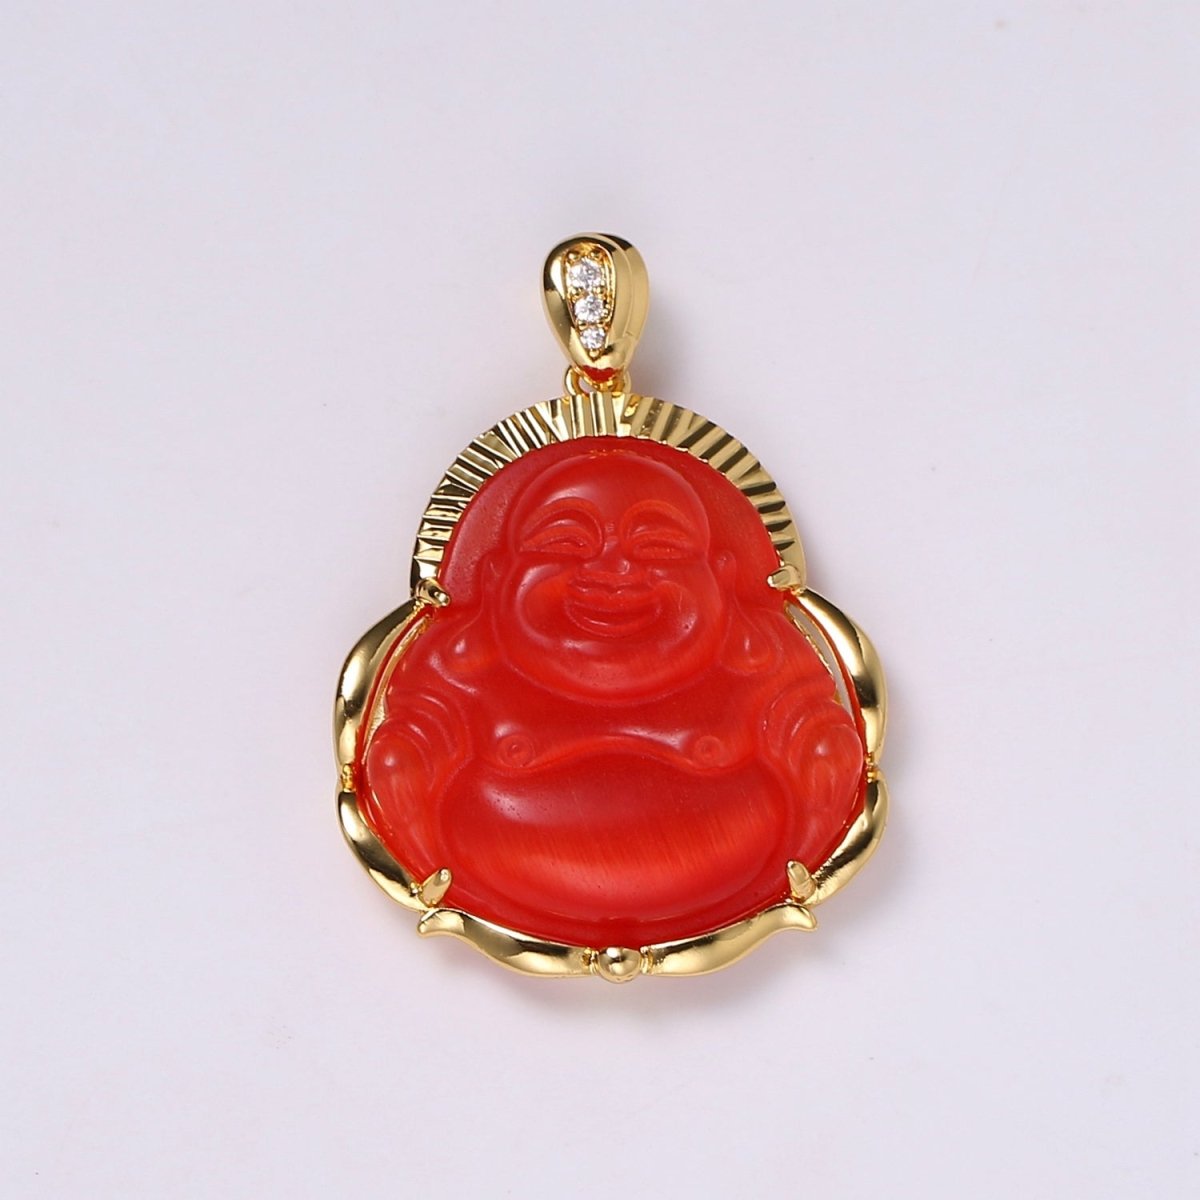 1x Gold Laughing Buddha Pendant Crystal Quartz Thai Buddha Charm Necklace in 14k Gold Filled Pendant for Statement Necklace O-203 ~ O-210 O-226 ~ O-232 - DLUXCA